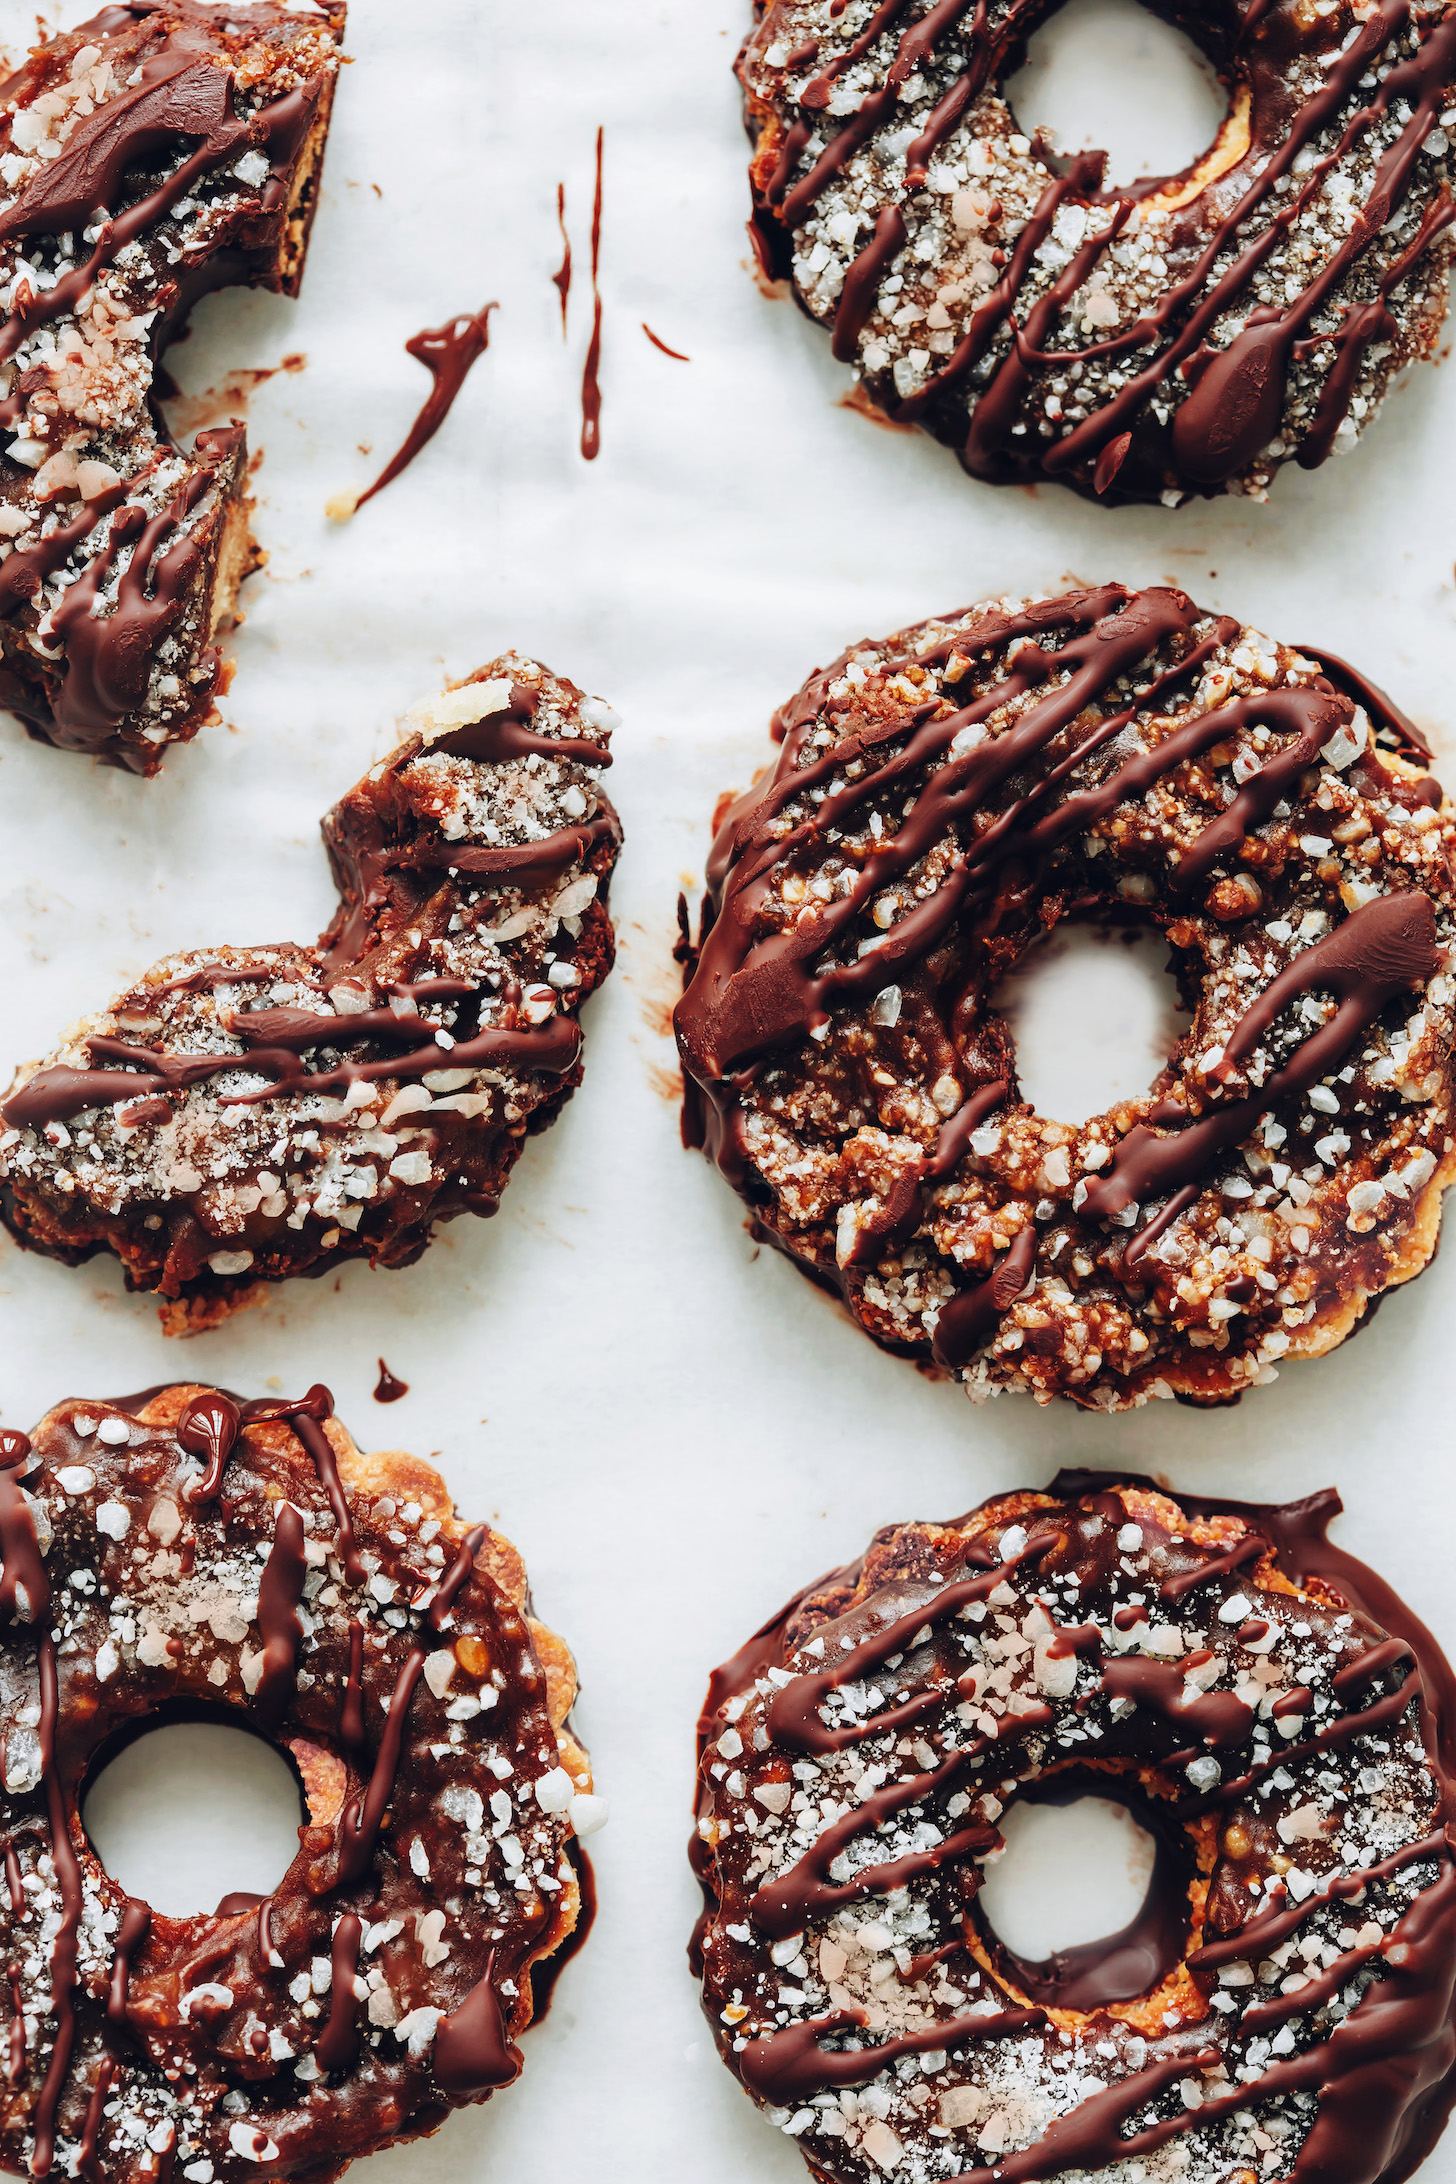 Gluten-free vegan samoas drizzled with melted chocolate